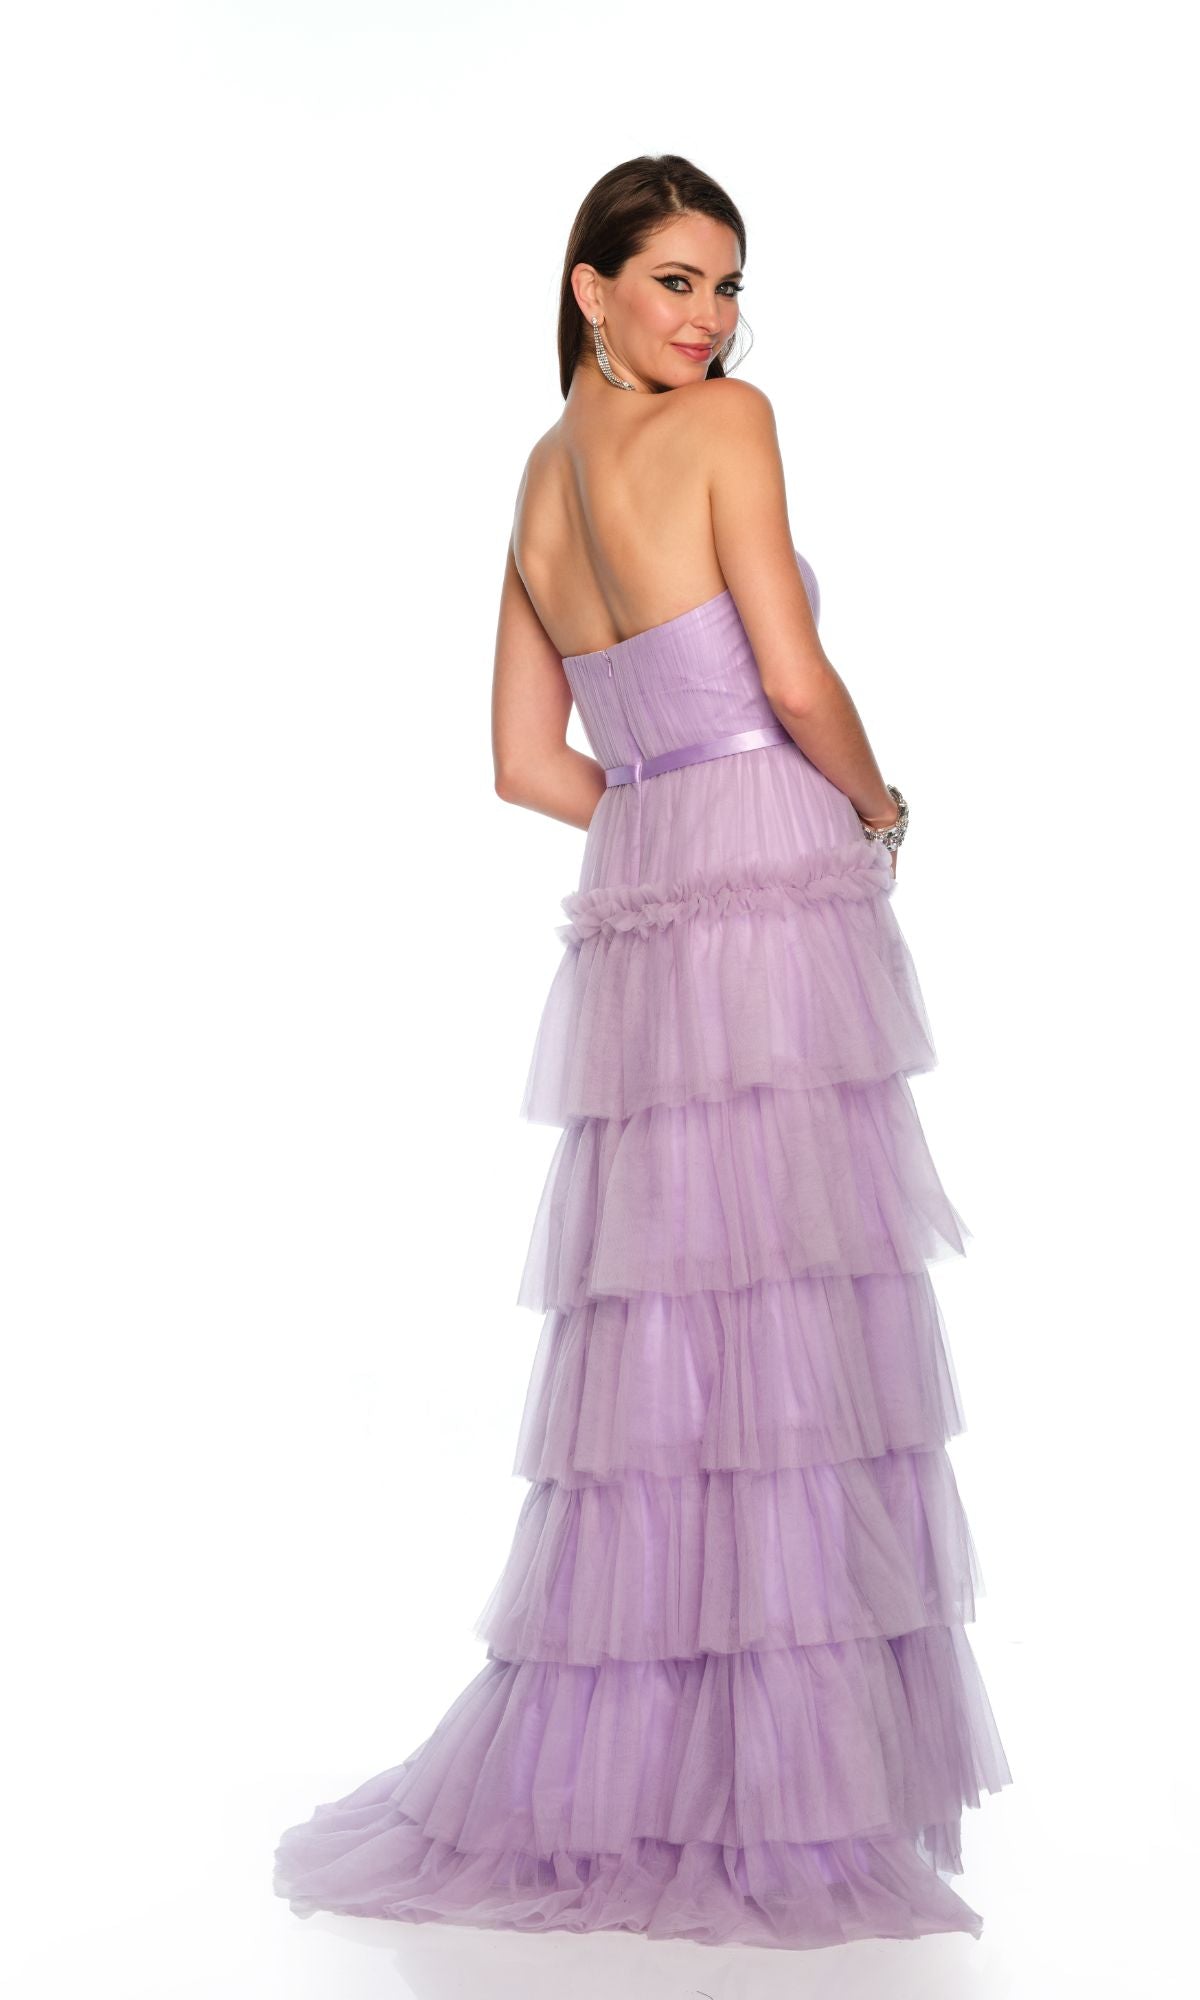 Long Formal Dress 11579 by Dave and Johnny